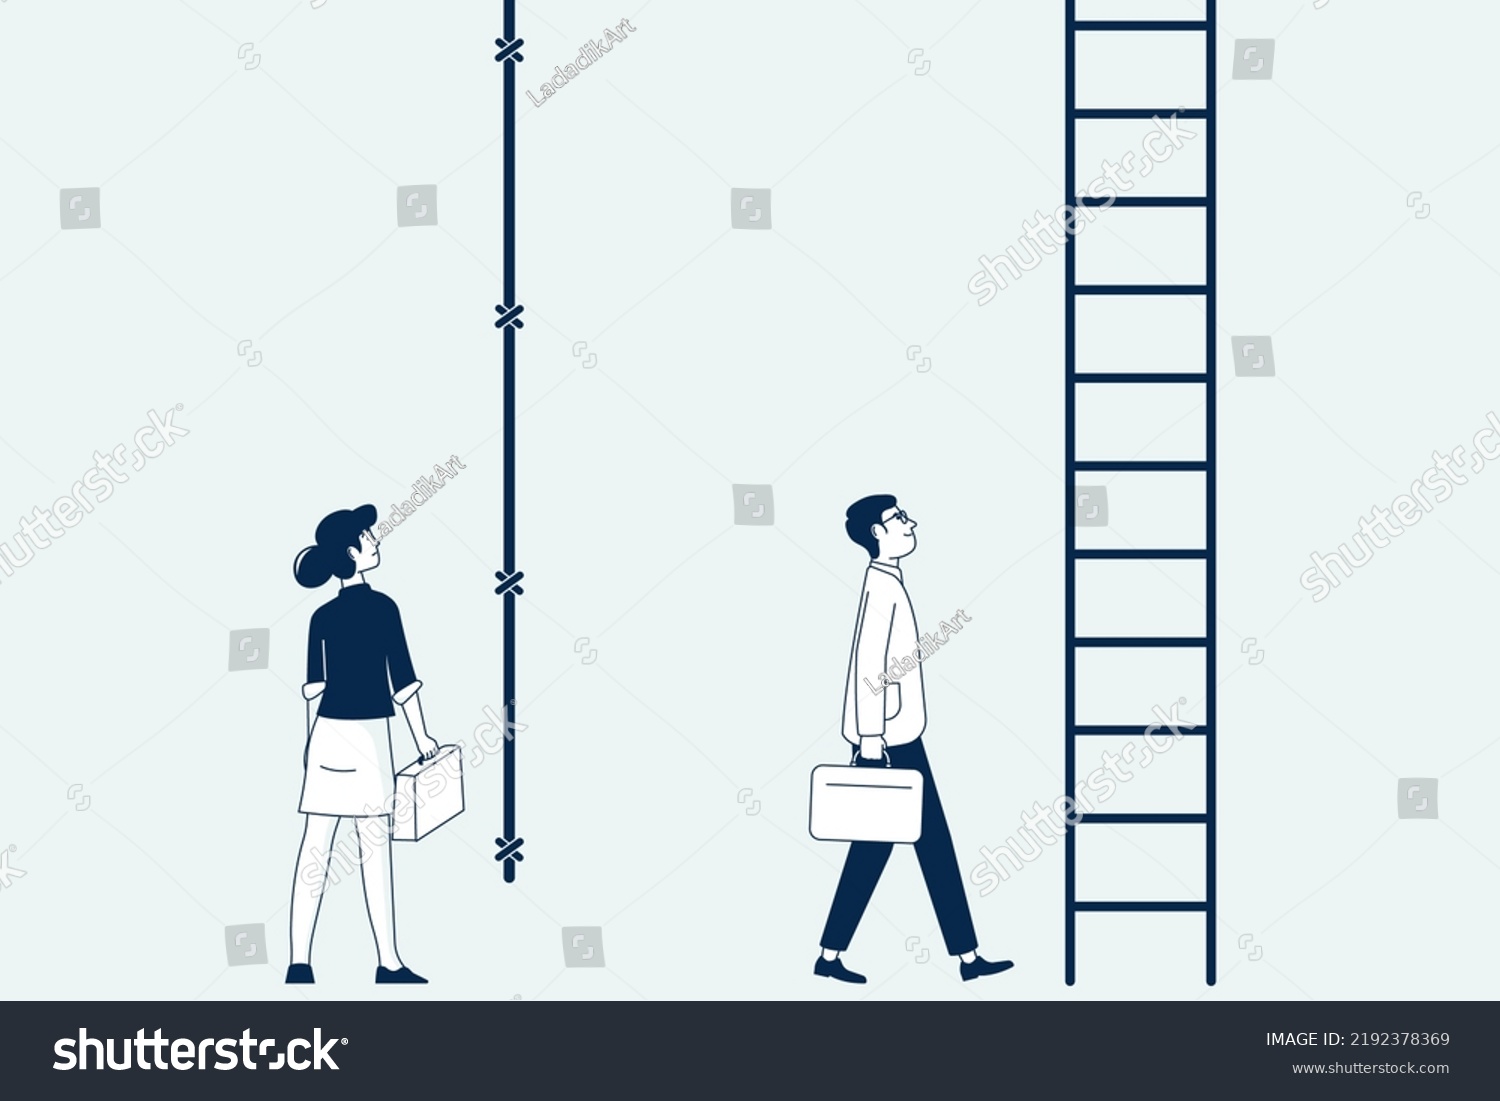 Gender gap, missing equality between woman and man on work. Career, business discrimination concept. Inequality wage and relations recent vector scene #2192378369